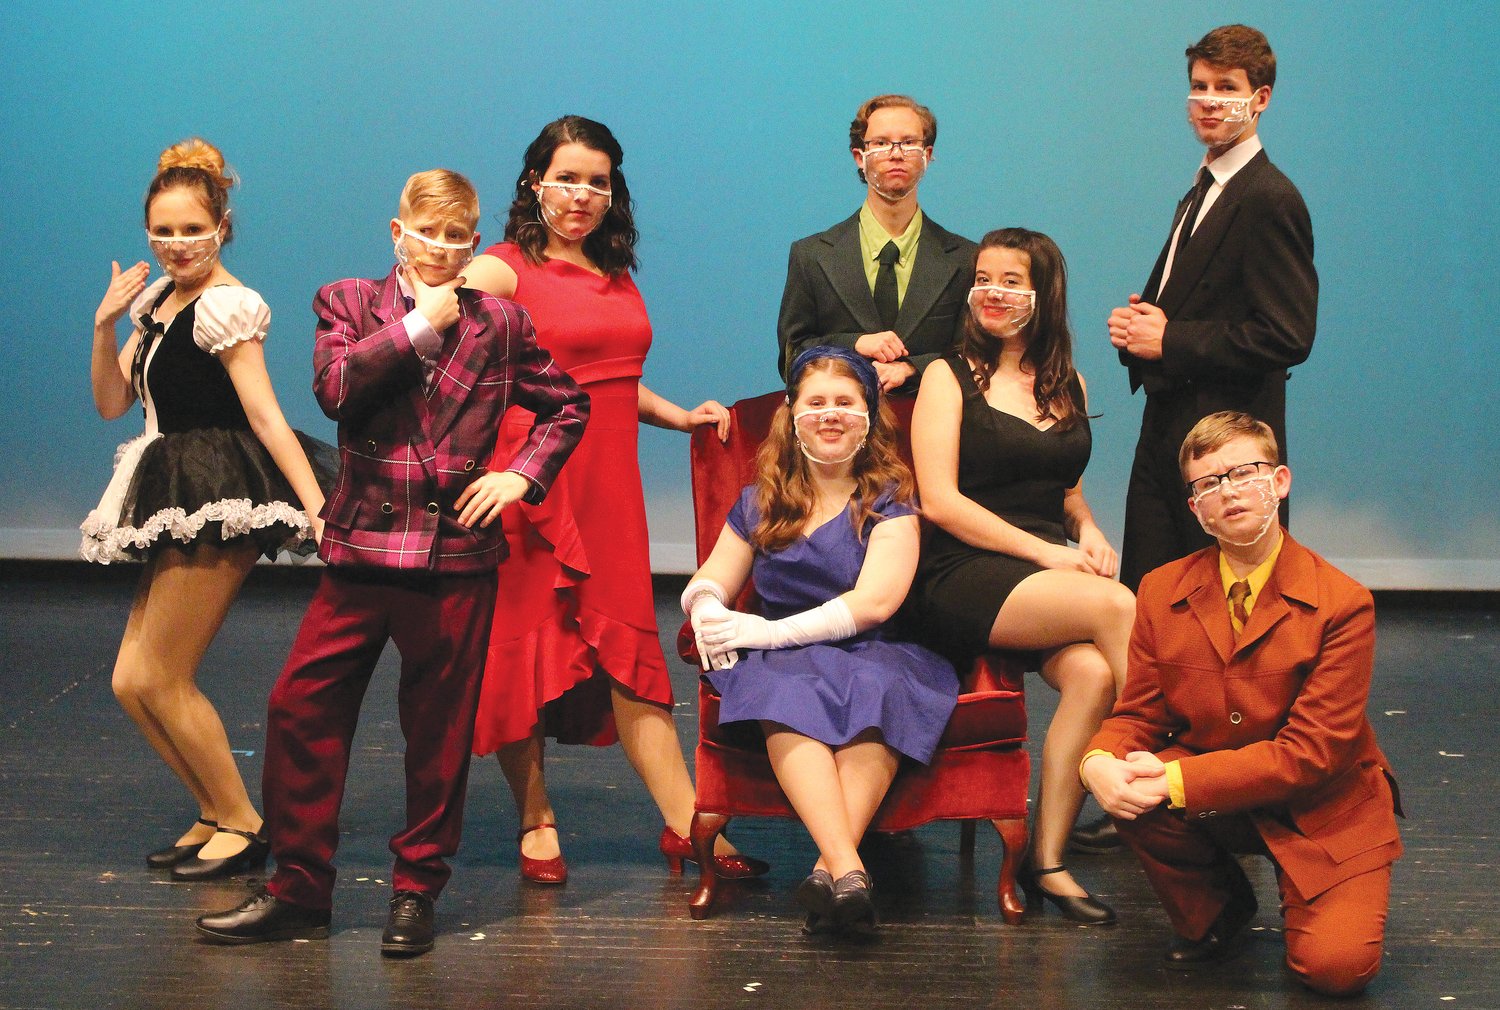 Theater department members will bring Clue to the Crawfordsville High School stage today through Sunday. Tickets must be purchased online. Masks and social distancing required.